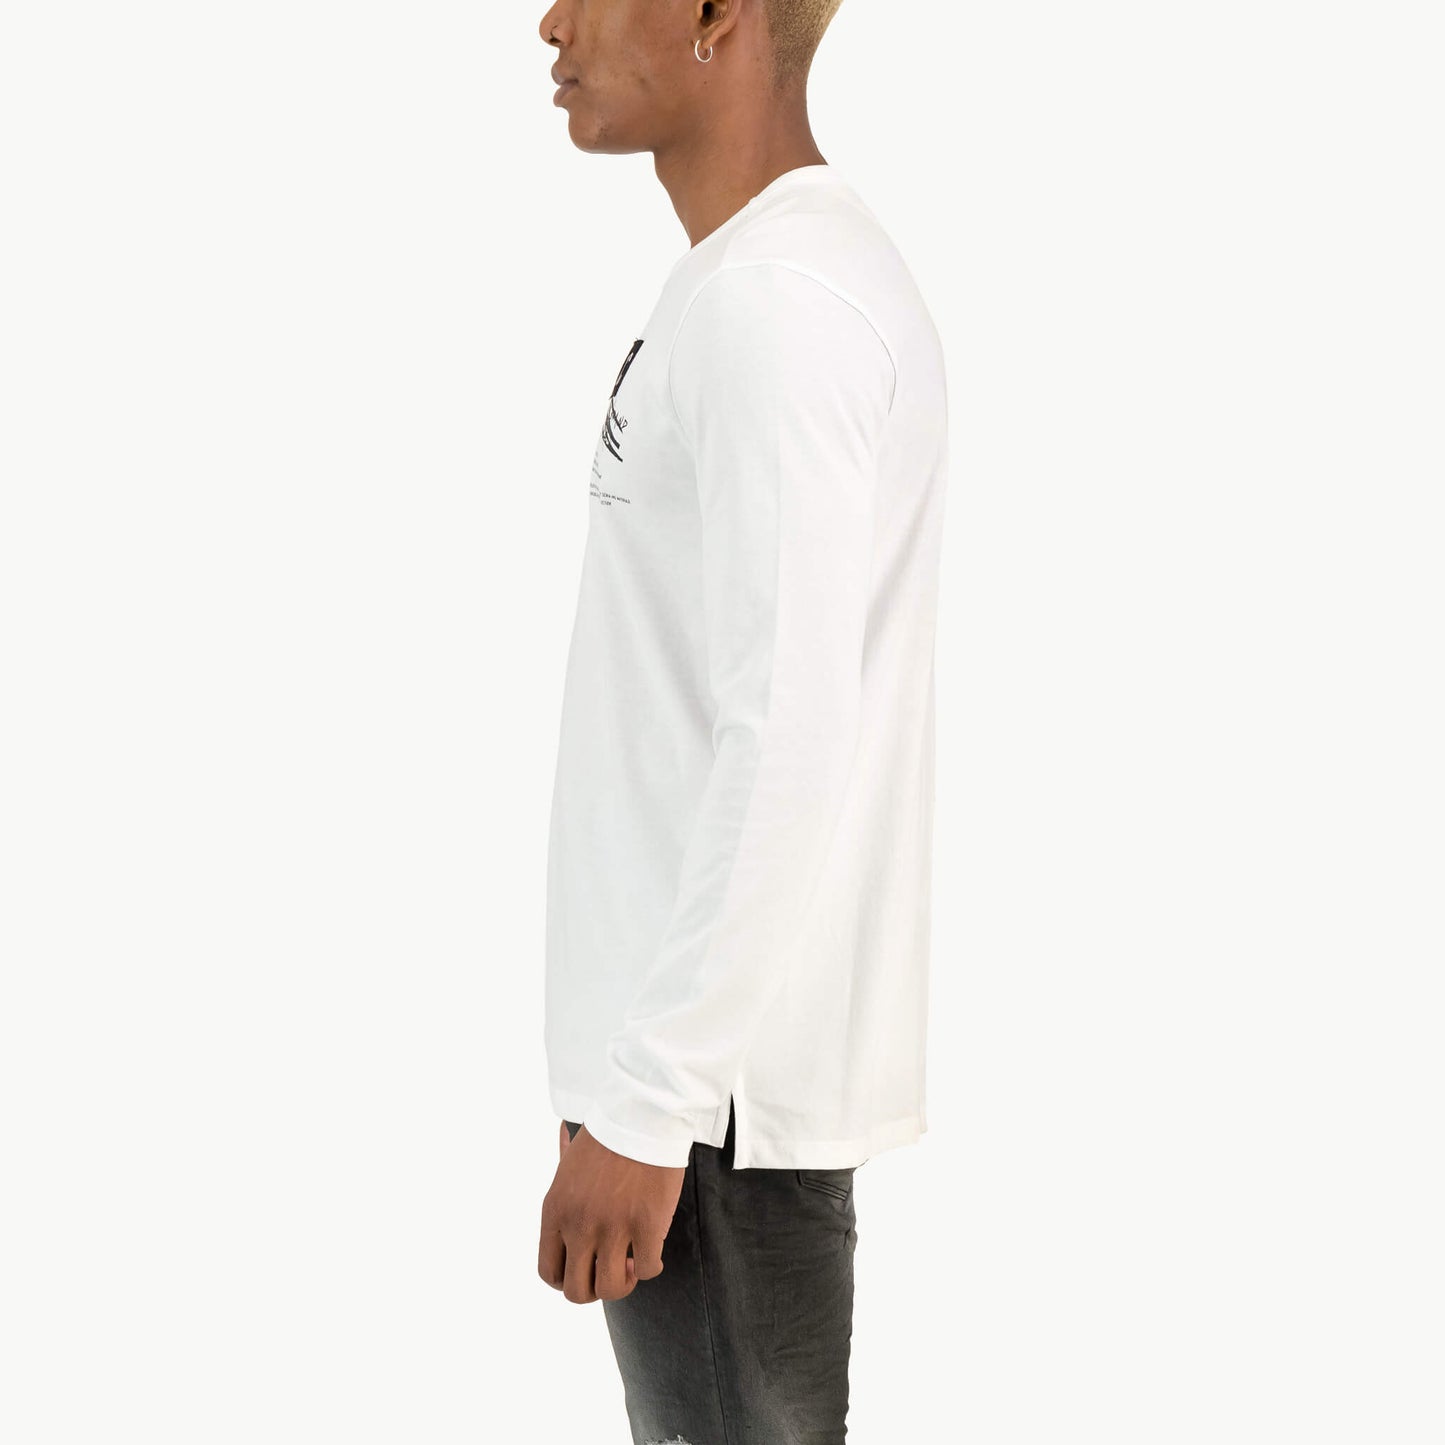 Ammons Top  - White